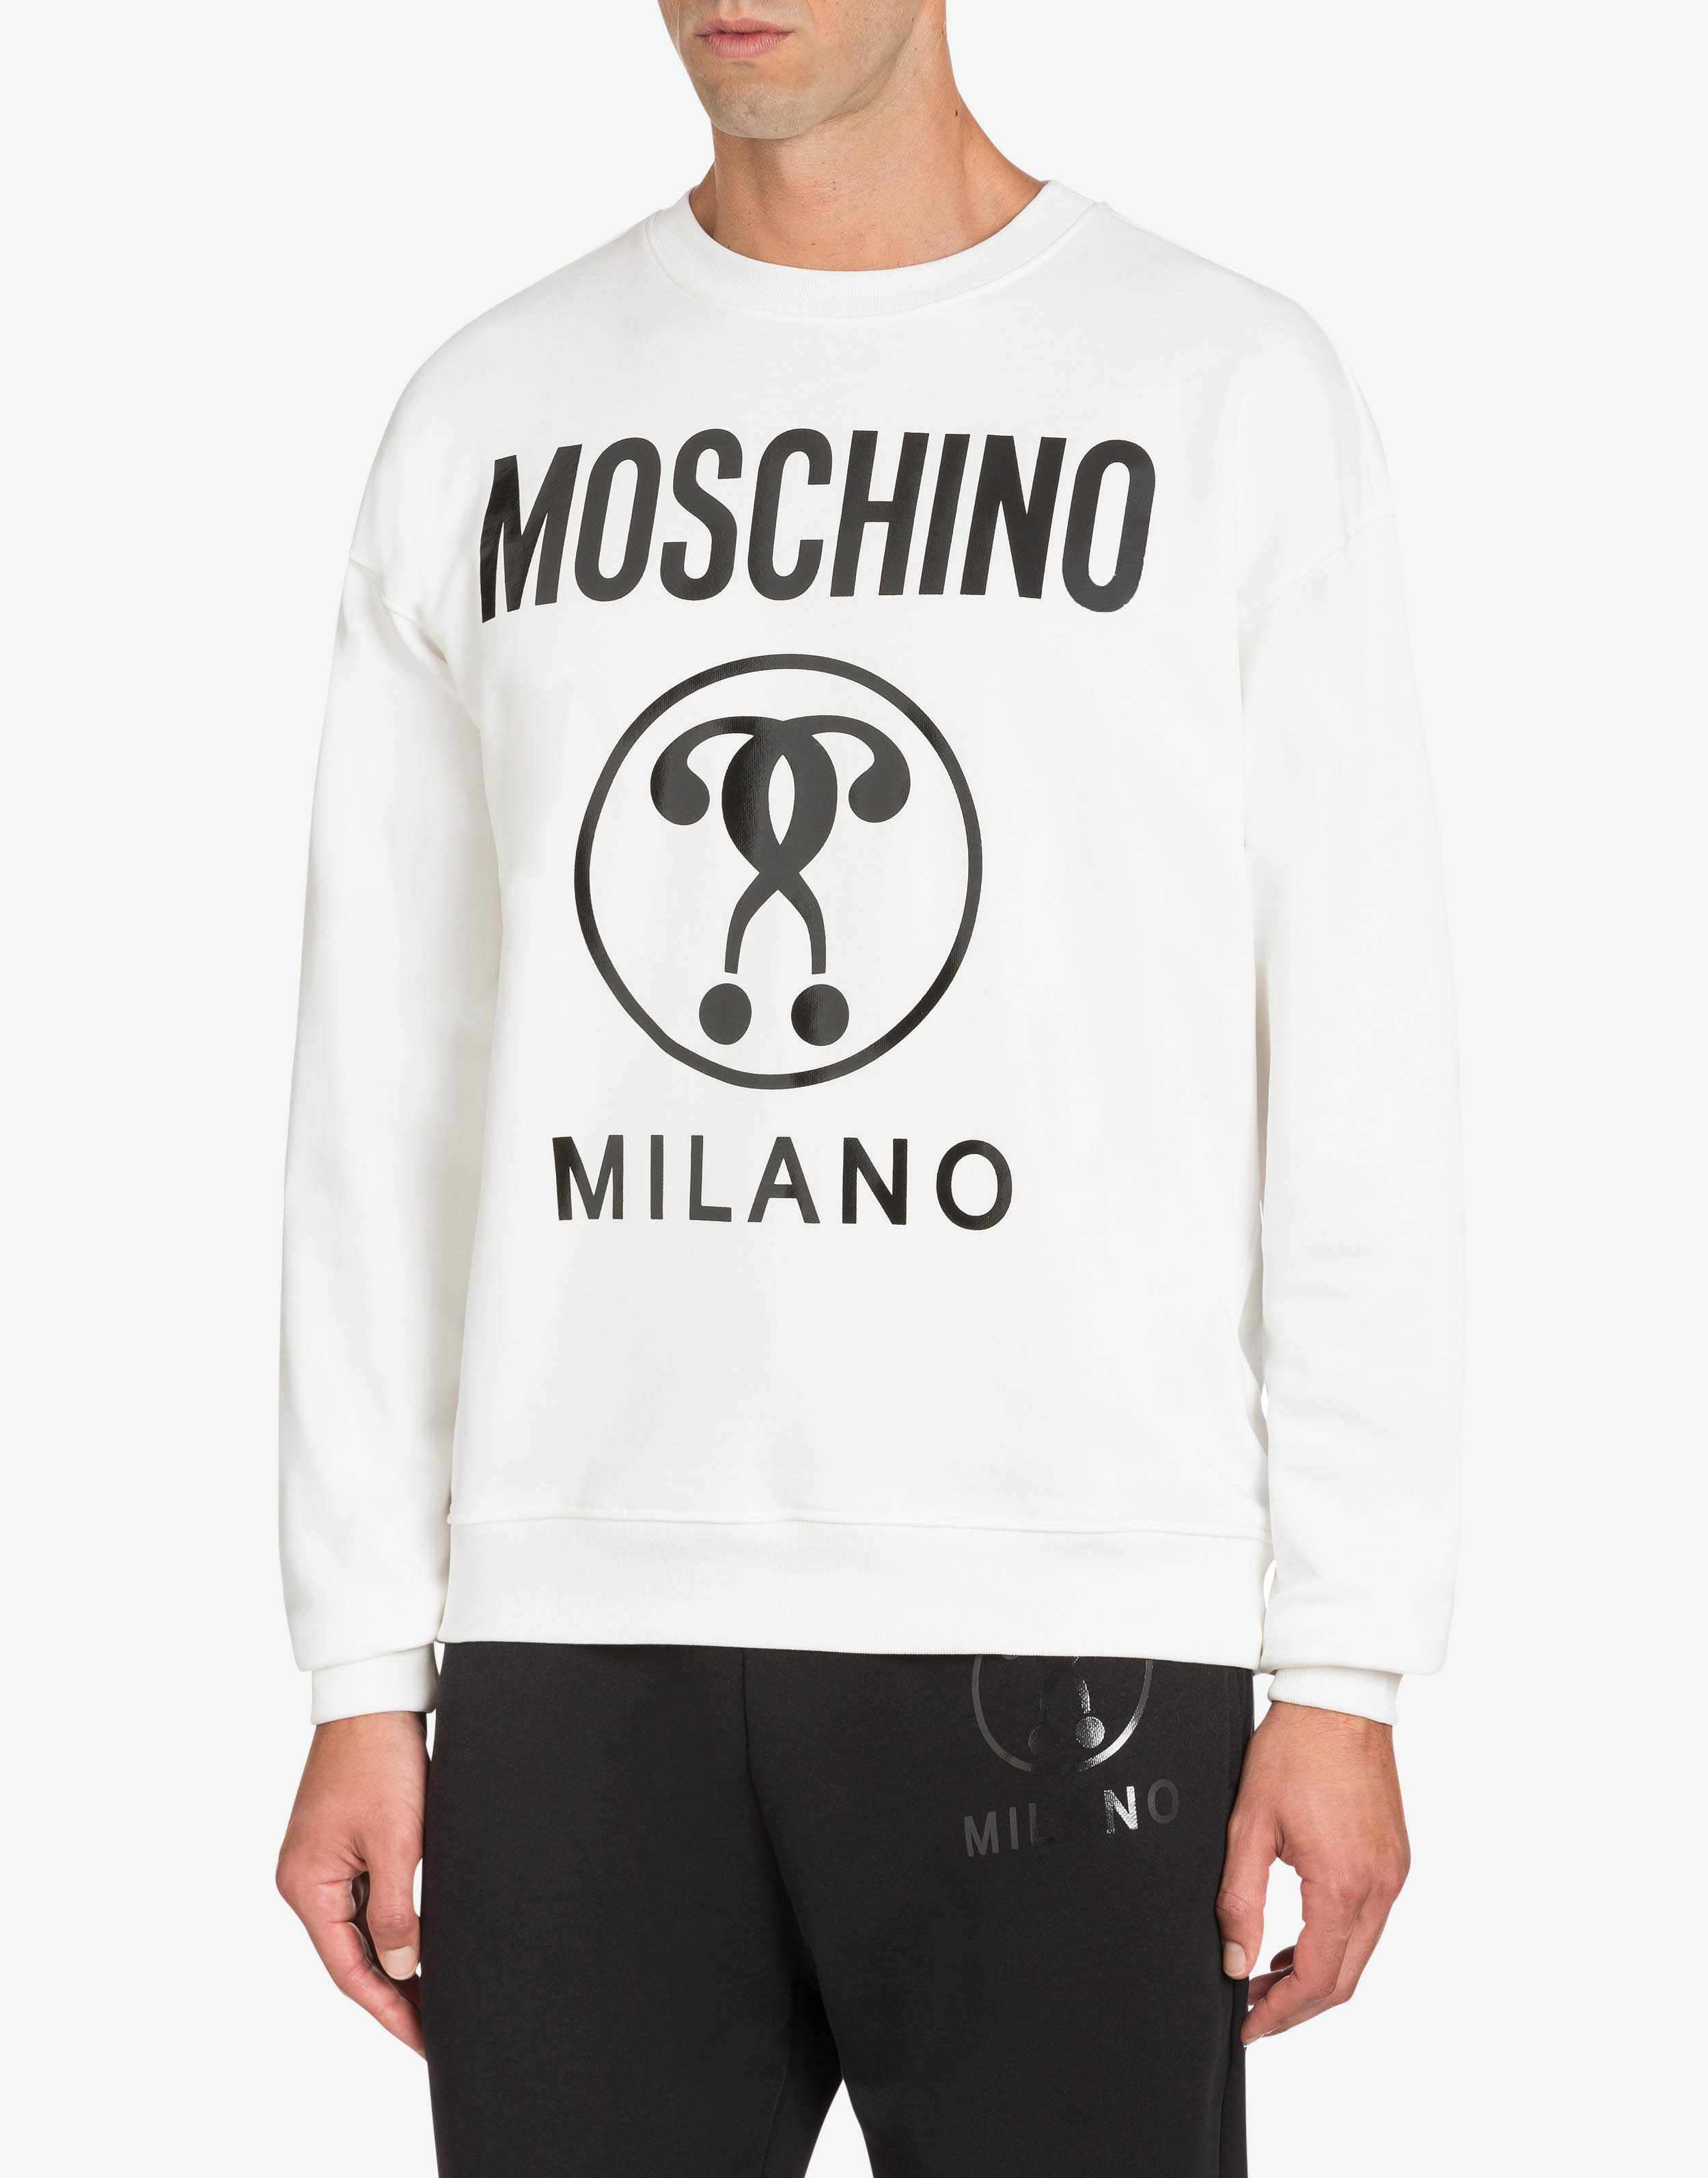 Moschino Clothing Men  Moschino Official Store